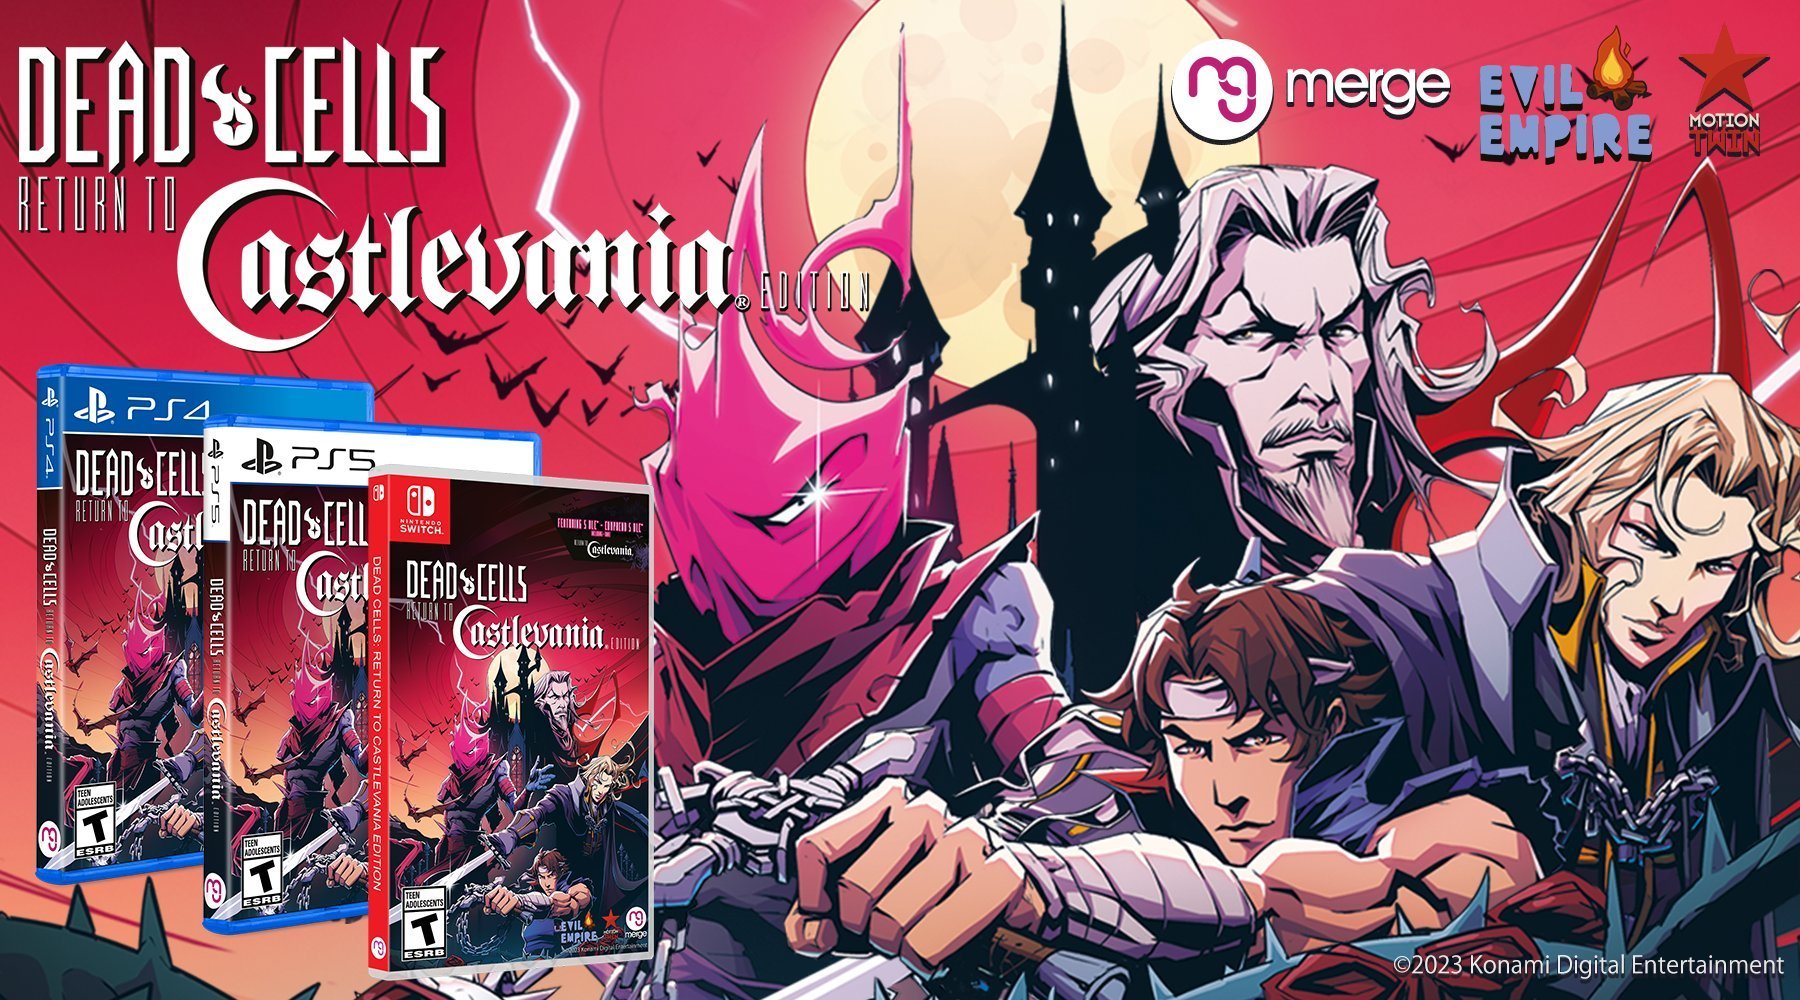 Wario64 on X: Dead Cells: Return to Castlevania Edition (Switch